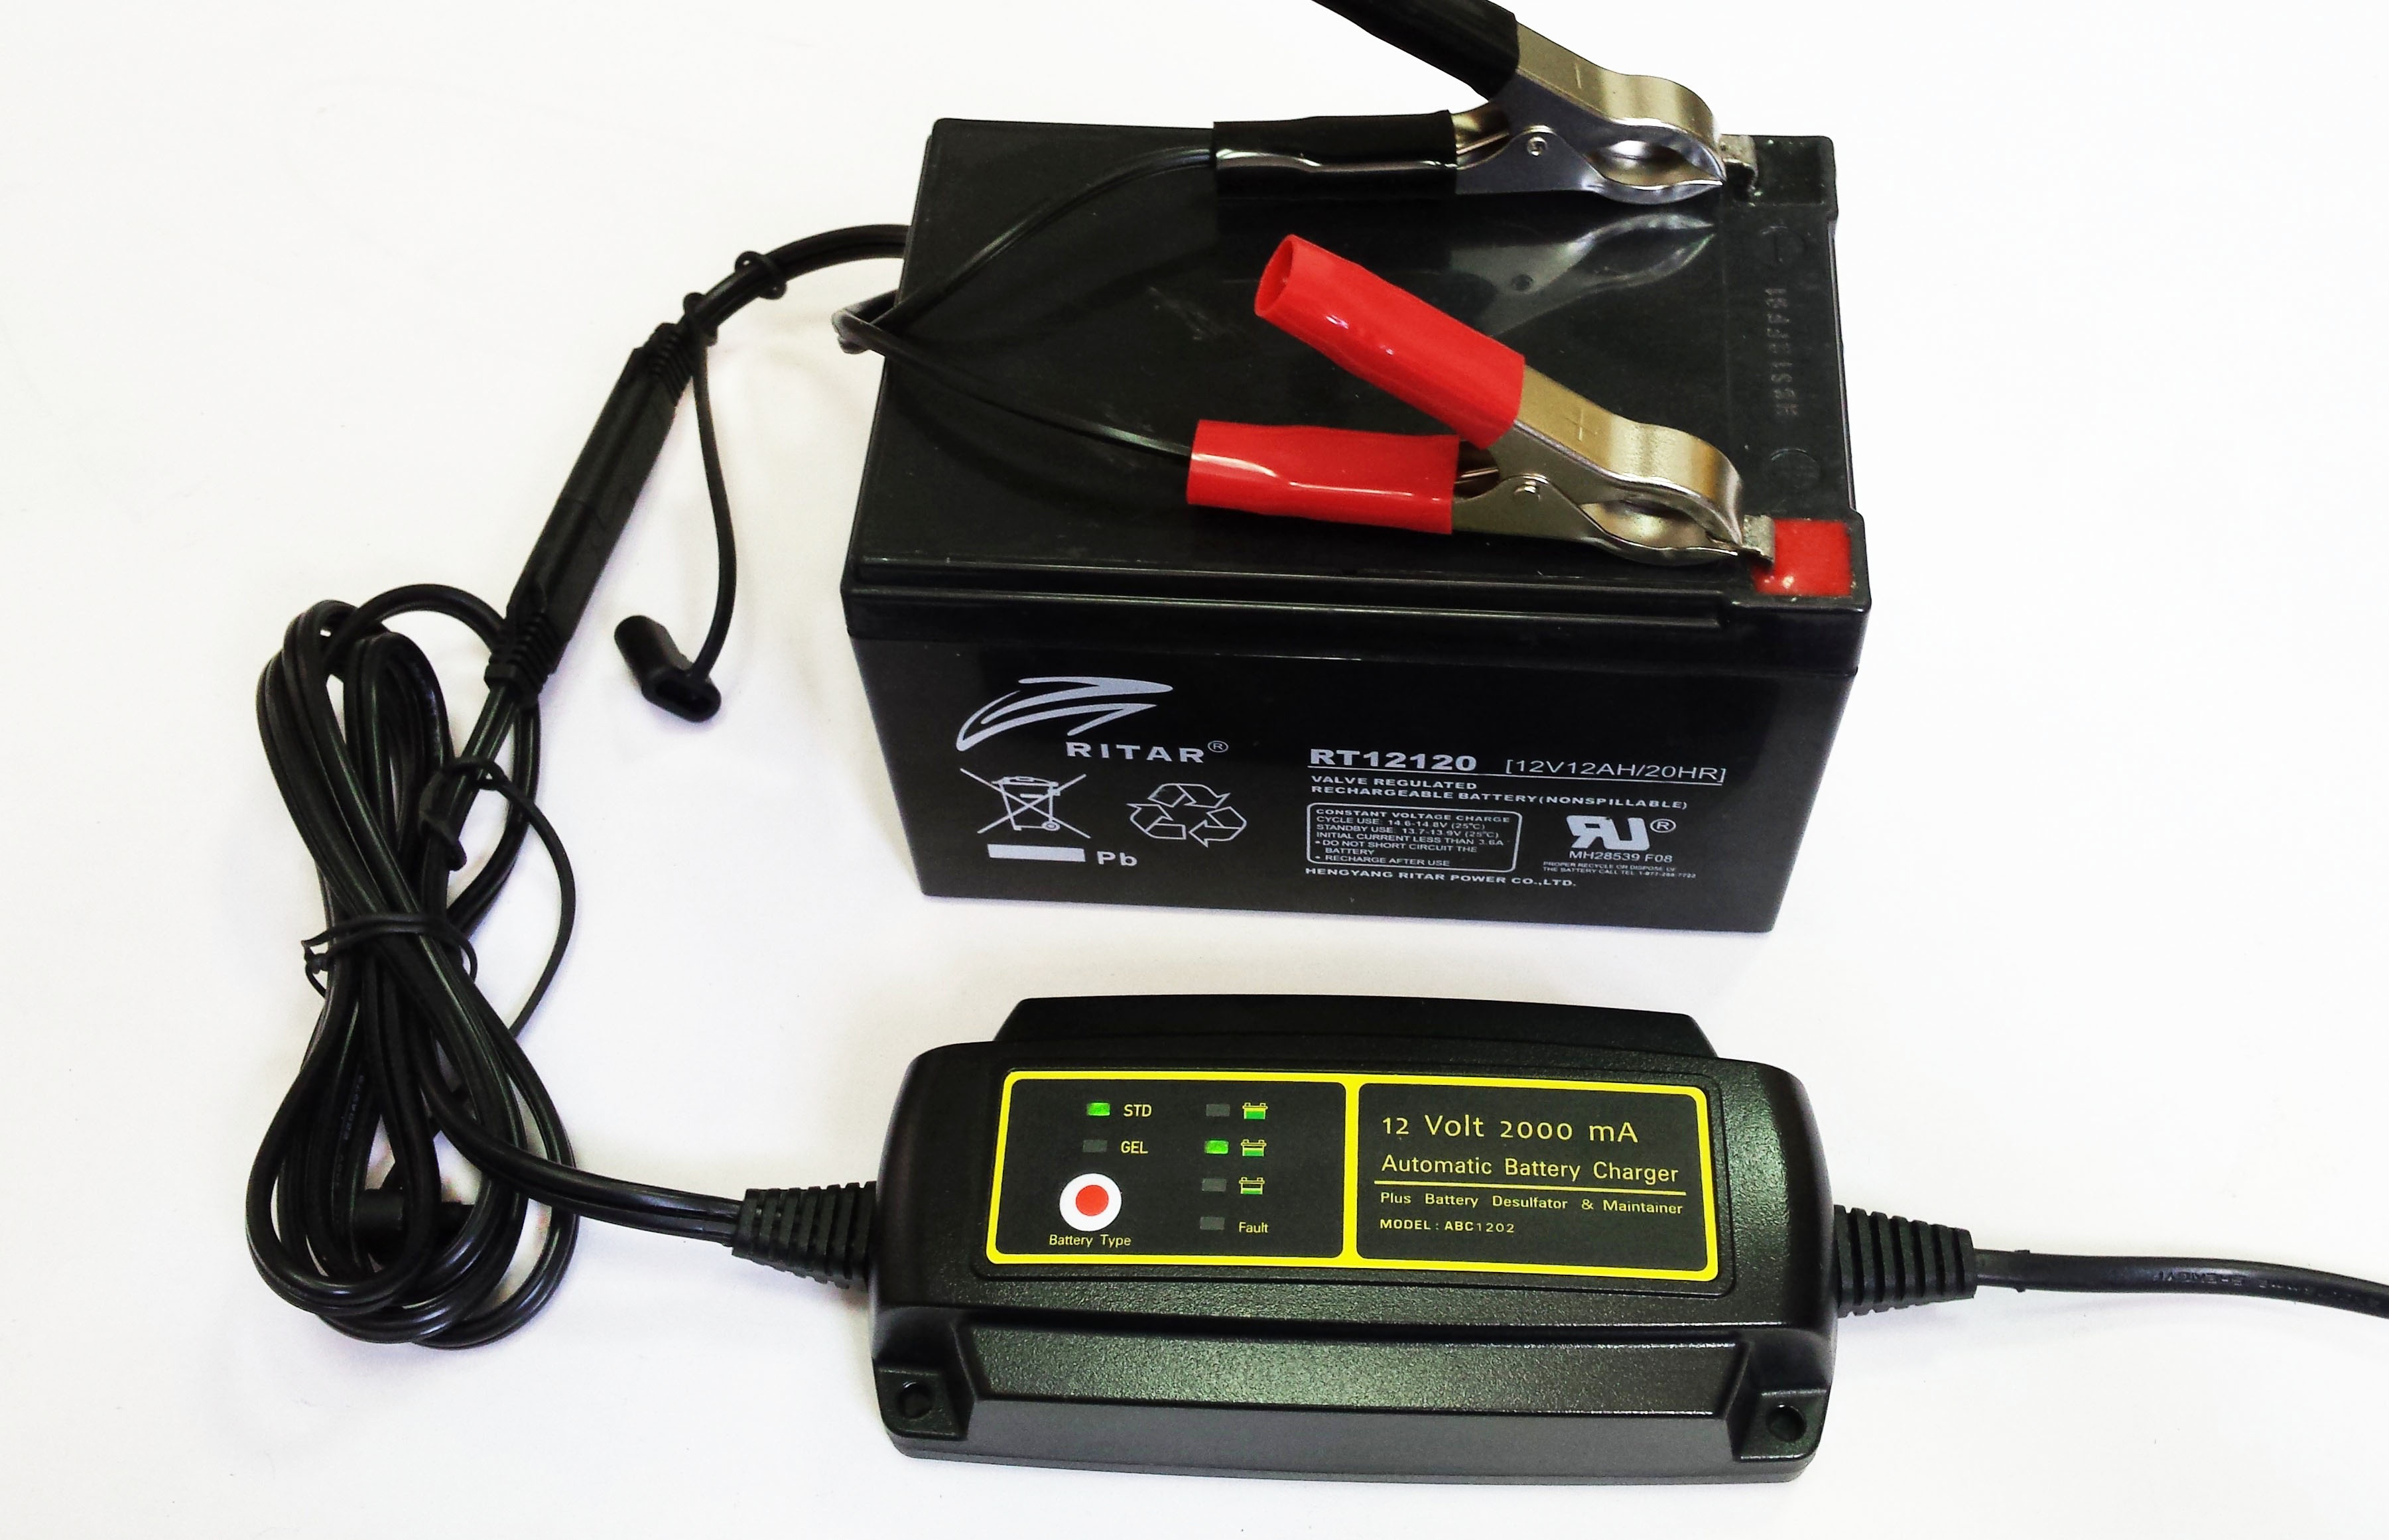 2000mA Smart Battery Charger